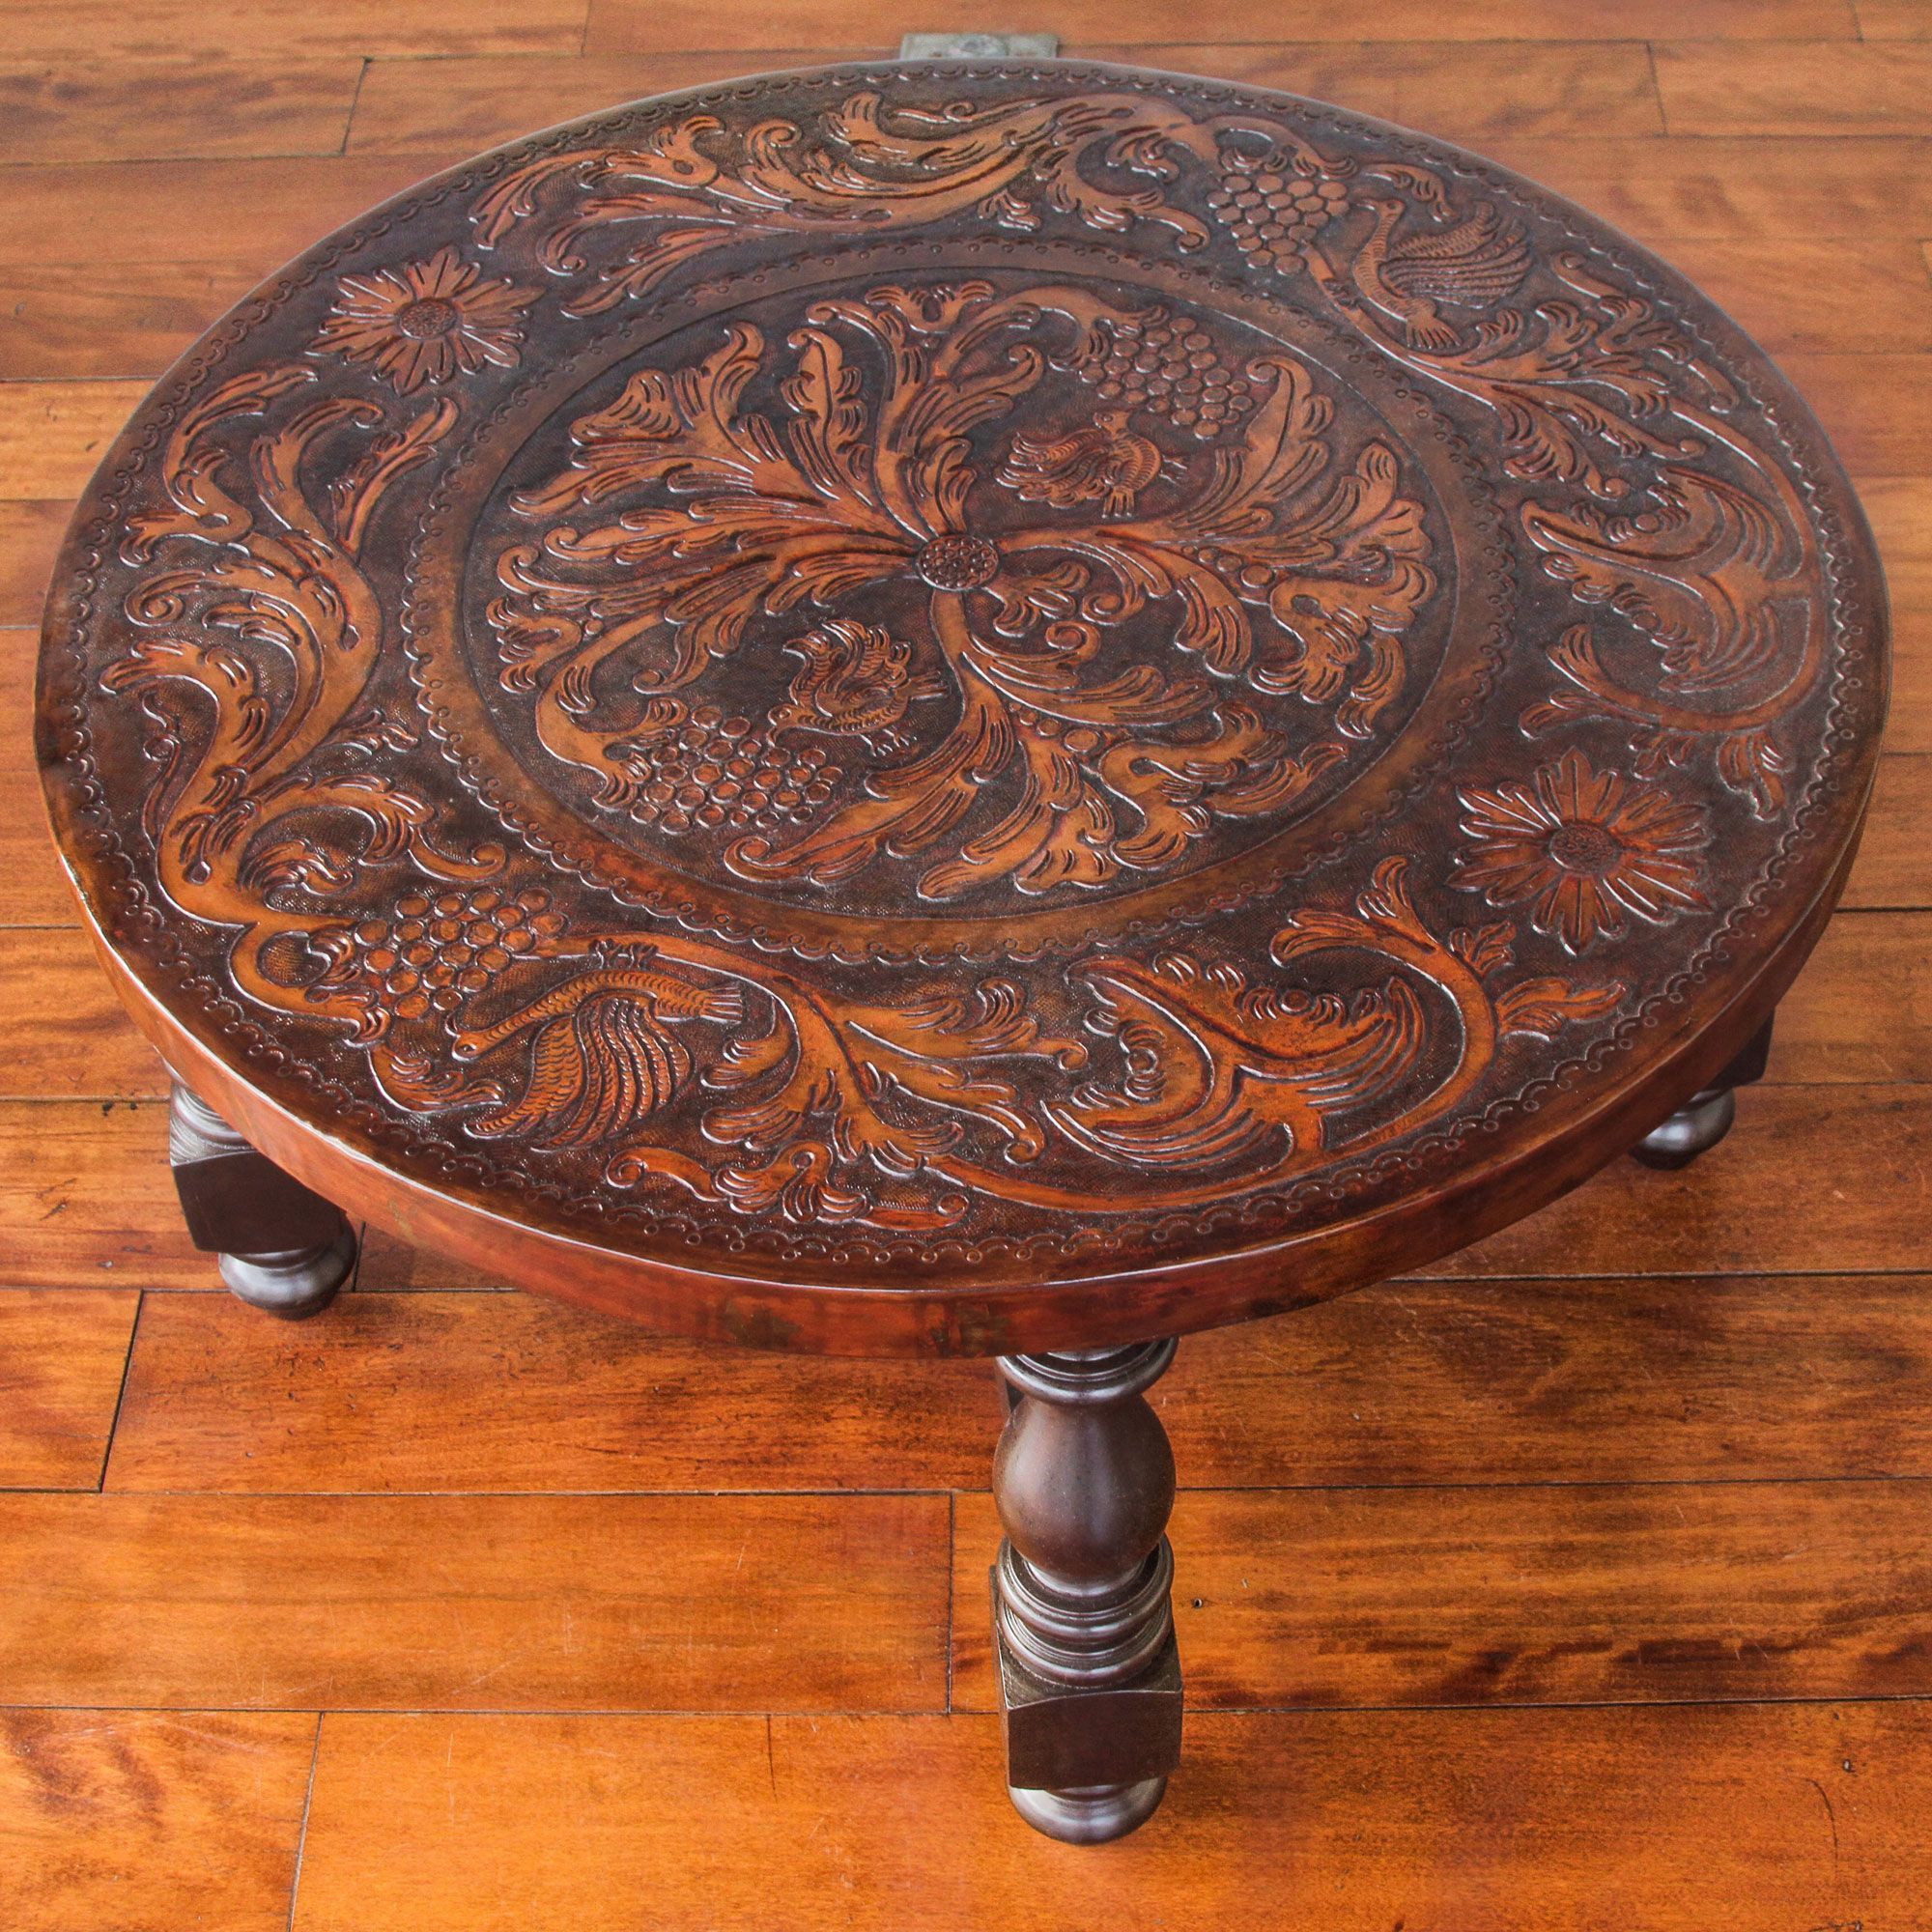 Mohena Wood And Leather Circular Coffee Table, 'vineyard Birds In Pemberly Row Replicated Wood Coffee Tables (View 20 of 20)